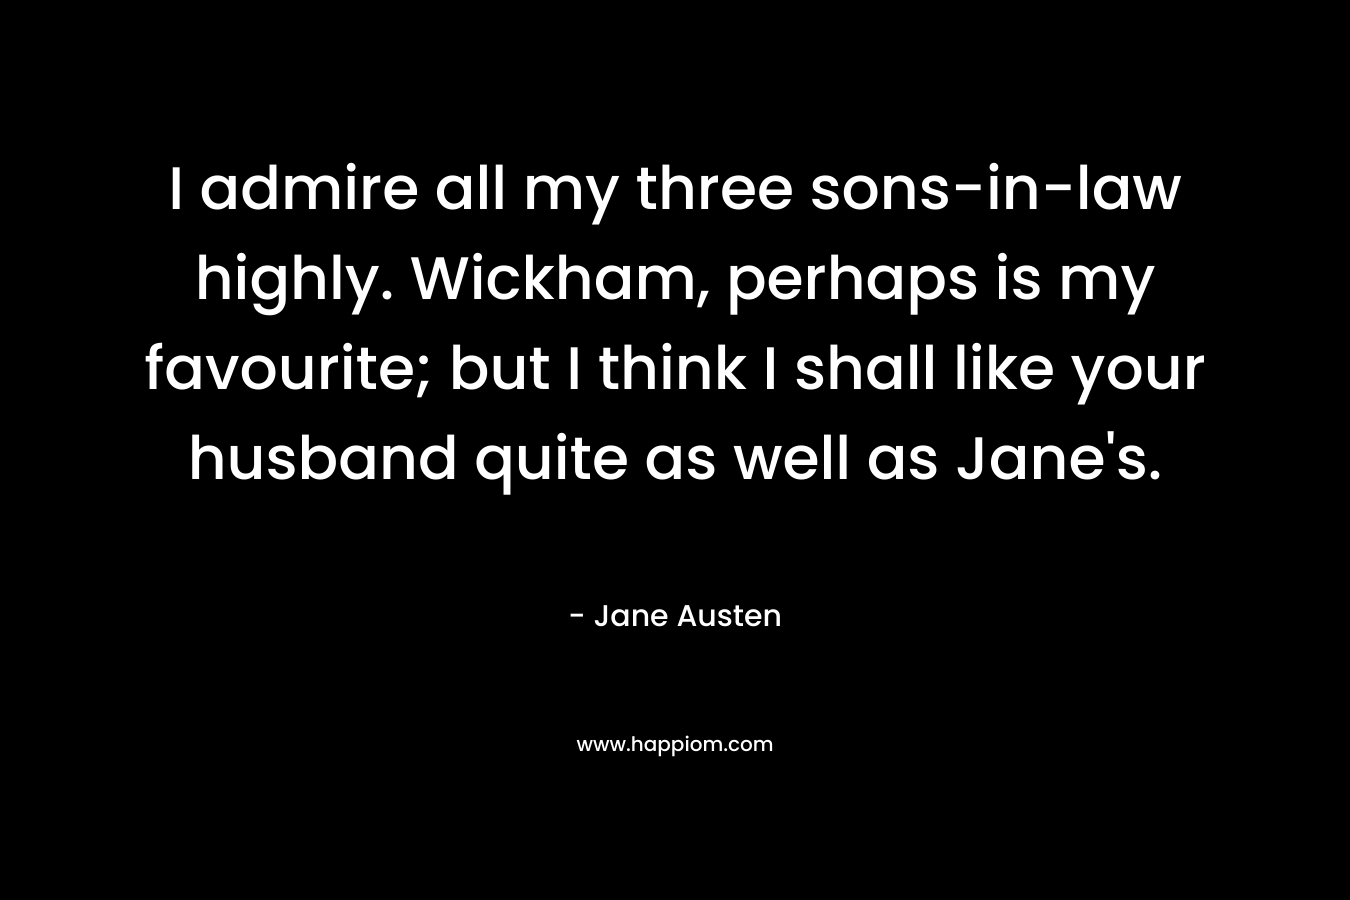 I admire all my three sons-in-law highly. Wickham, perhaps is my favourite; but I think I shall like your husband quite as well as Jane’s. – Jane Austen